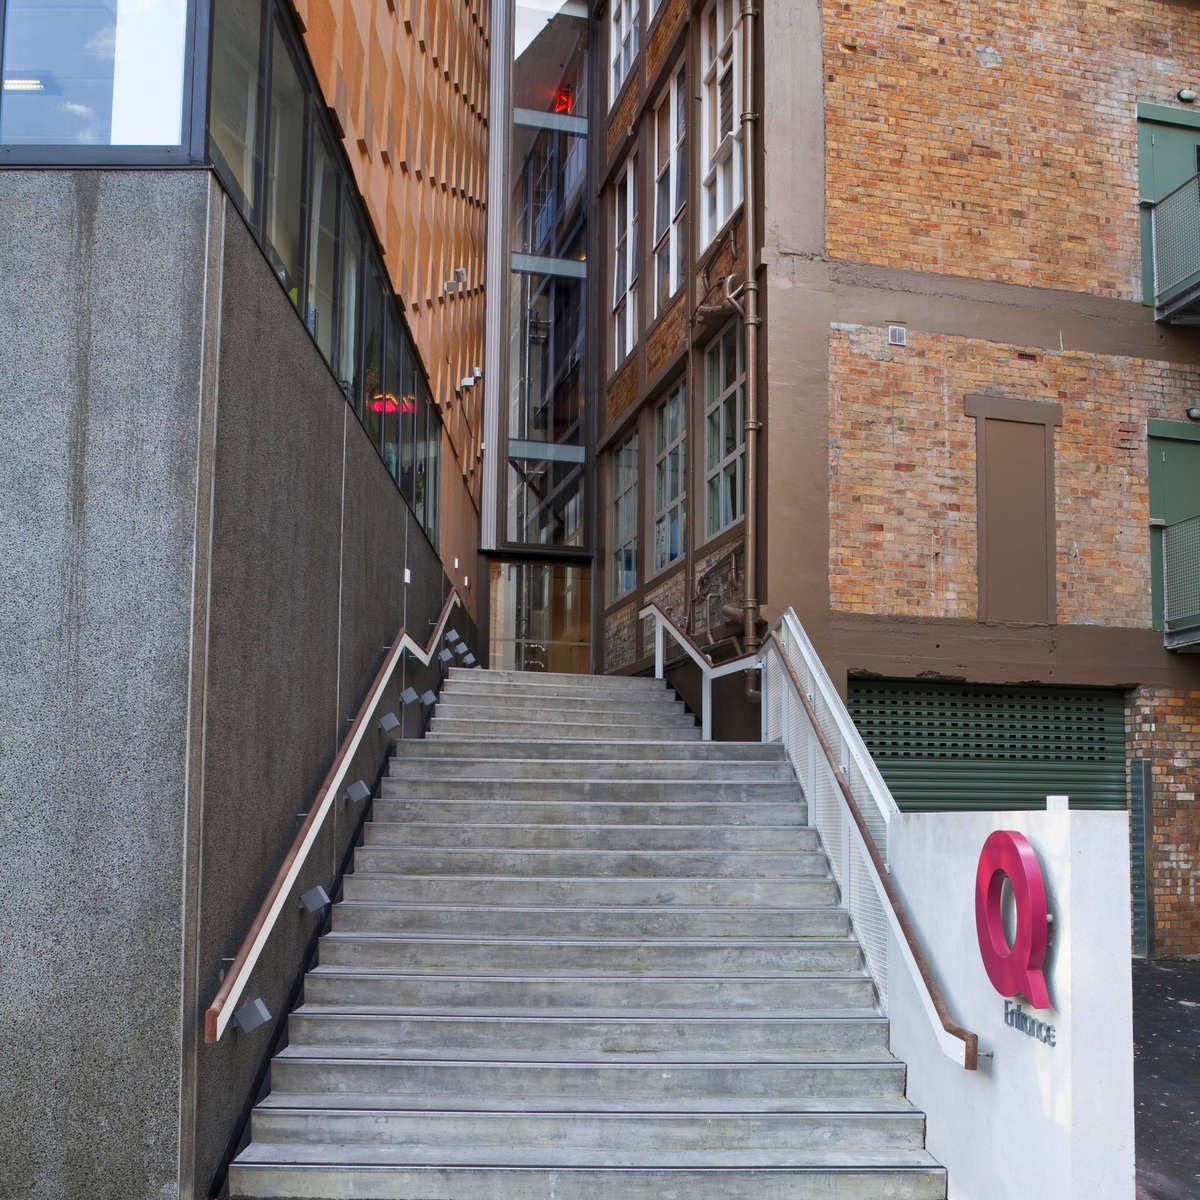 Concrete stairs leading to entrance to Q Theatre